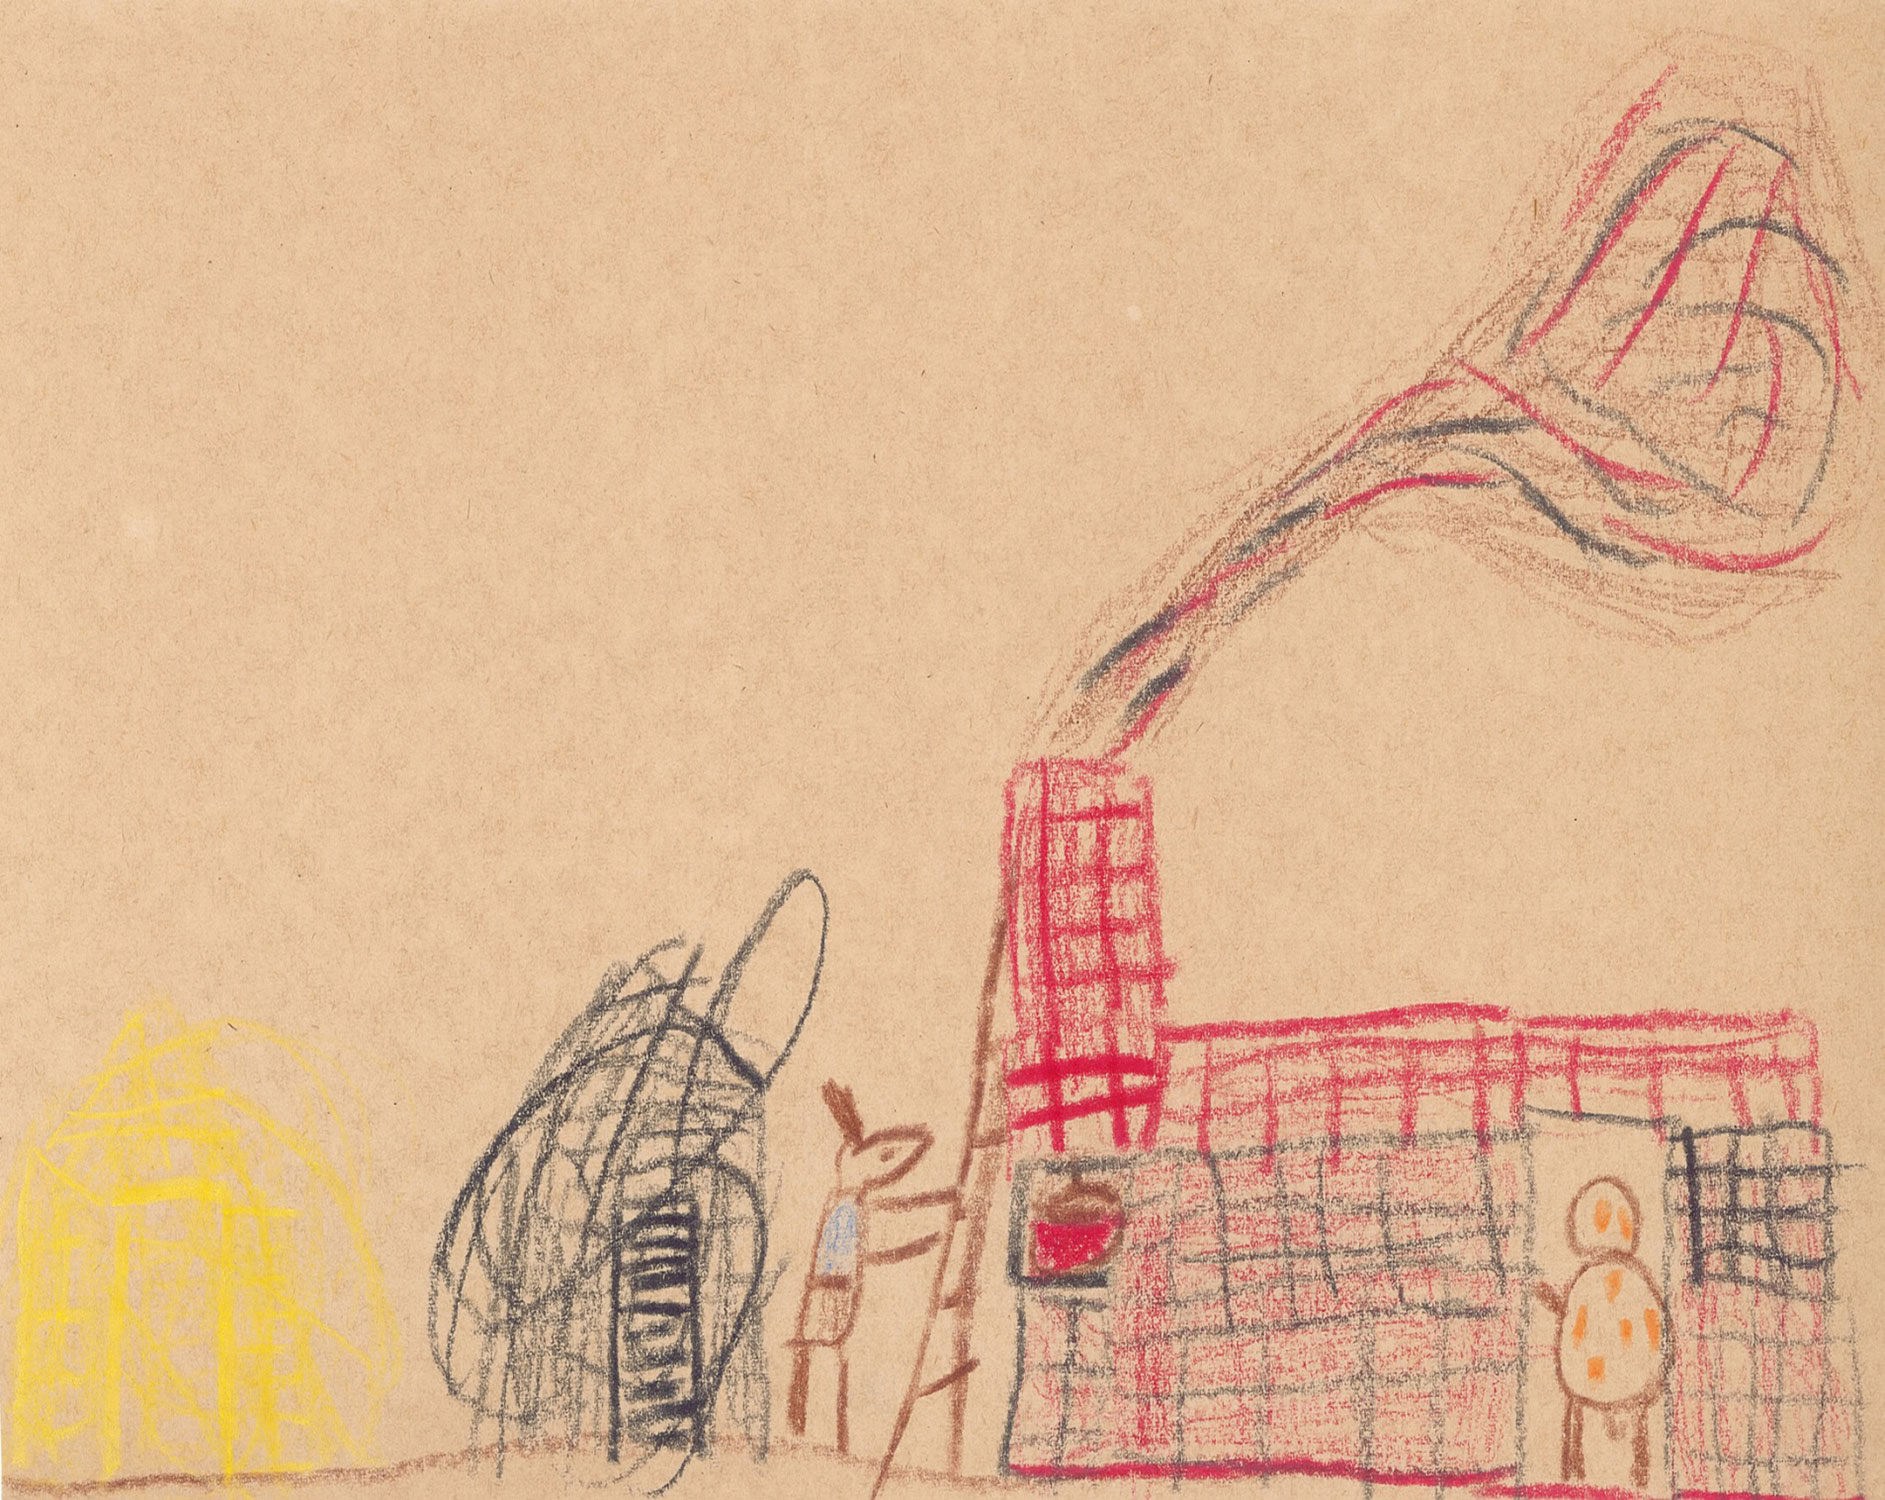 Walter Moberg fireplace crayola drawing of chimney fire